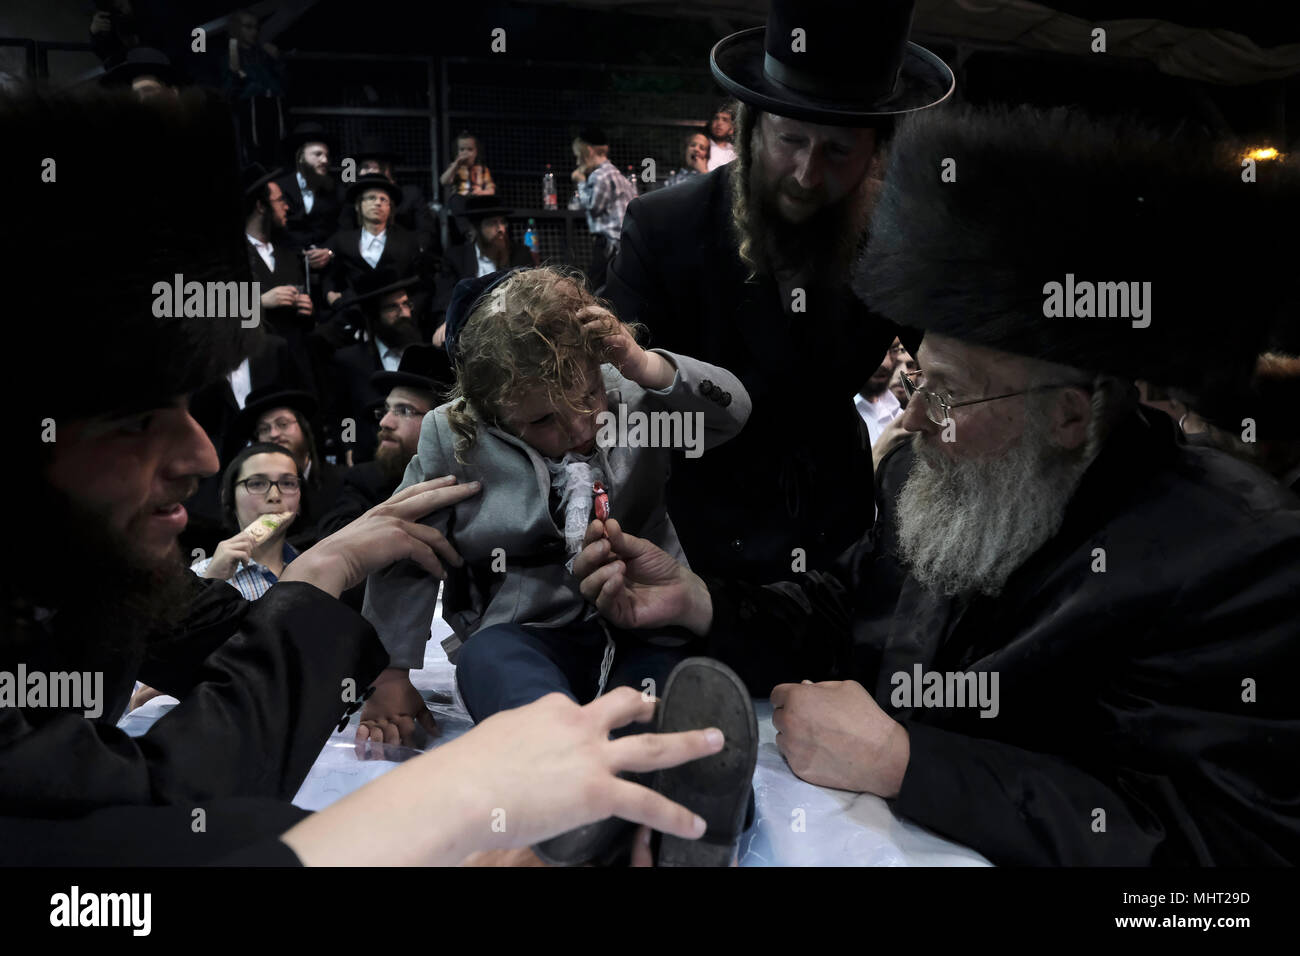 A three-year old Jewish boy takes part in the traditional Halake ceremony, a first hair cut from the Rabbi of the Pinsk-Karlin Hassidic dynasty in Geula religious neighborhood during the celebration of Lag BaOmer holiday which marks the celebration, interpreted by some as anniversary of death of Rabbi Shimon bar Yochai, one of Judaism's great sages some 1800 years ago and the day on which he revealed the deepest secrets of kabbalah a landmark text of Jewish mysticism Stock Photo